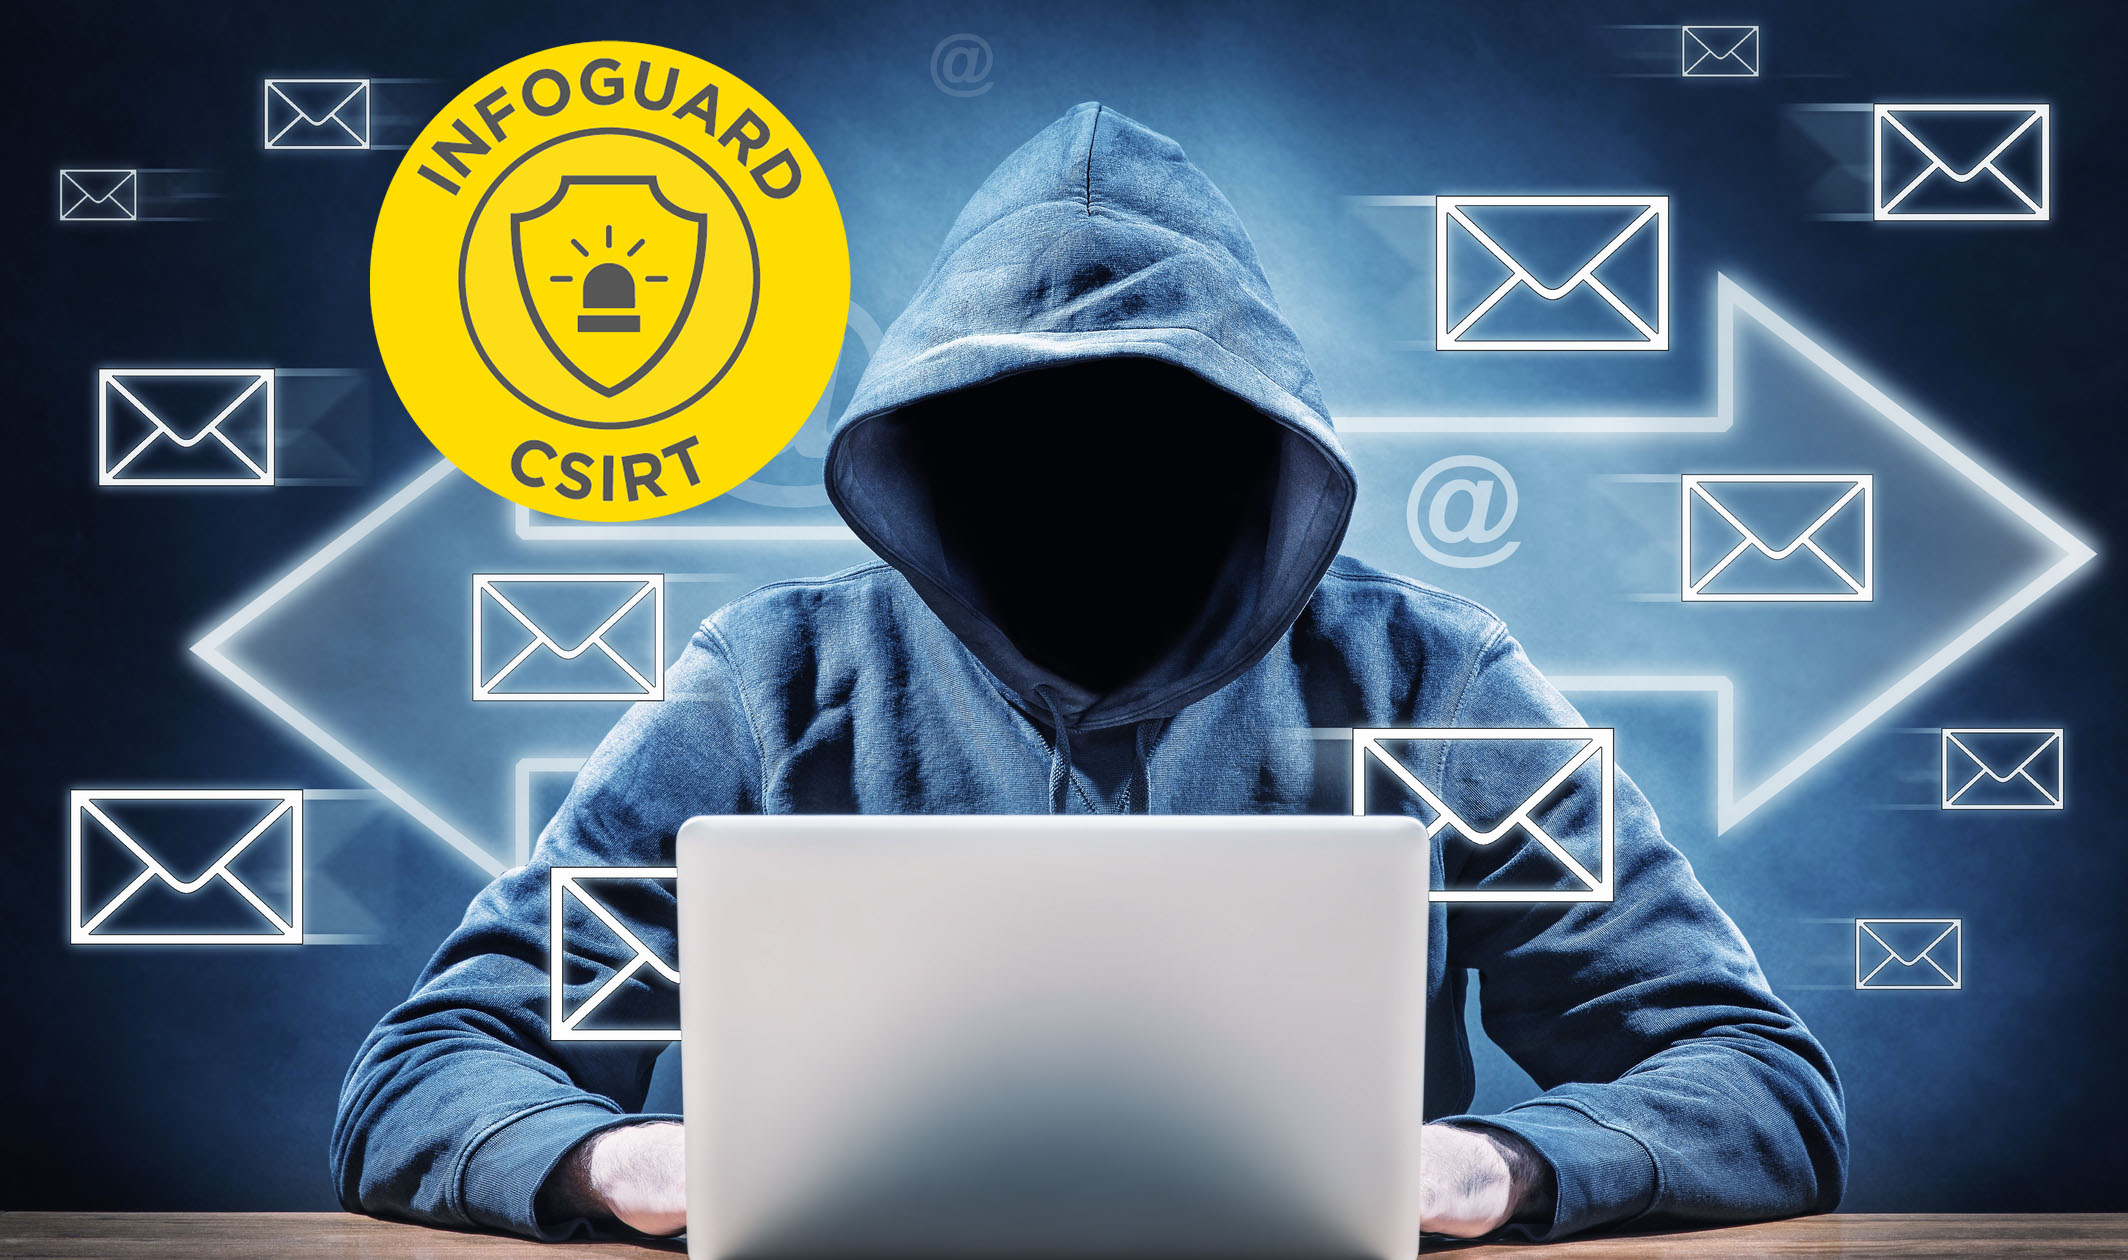 [InfoGuard CSIRT Warning] Currently Ransomware Attacks are underway with the Parcel Trick